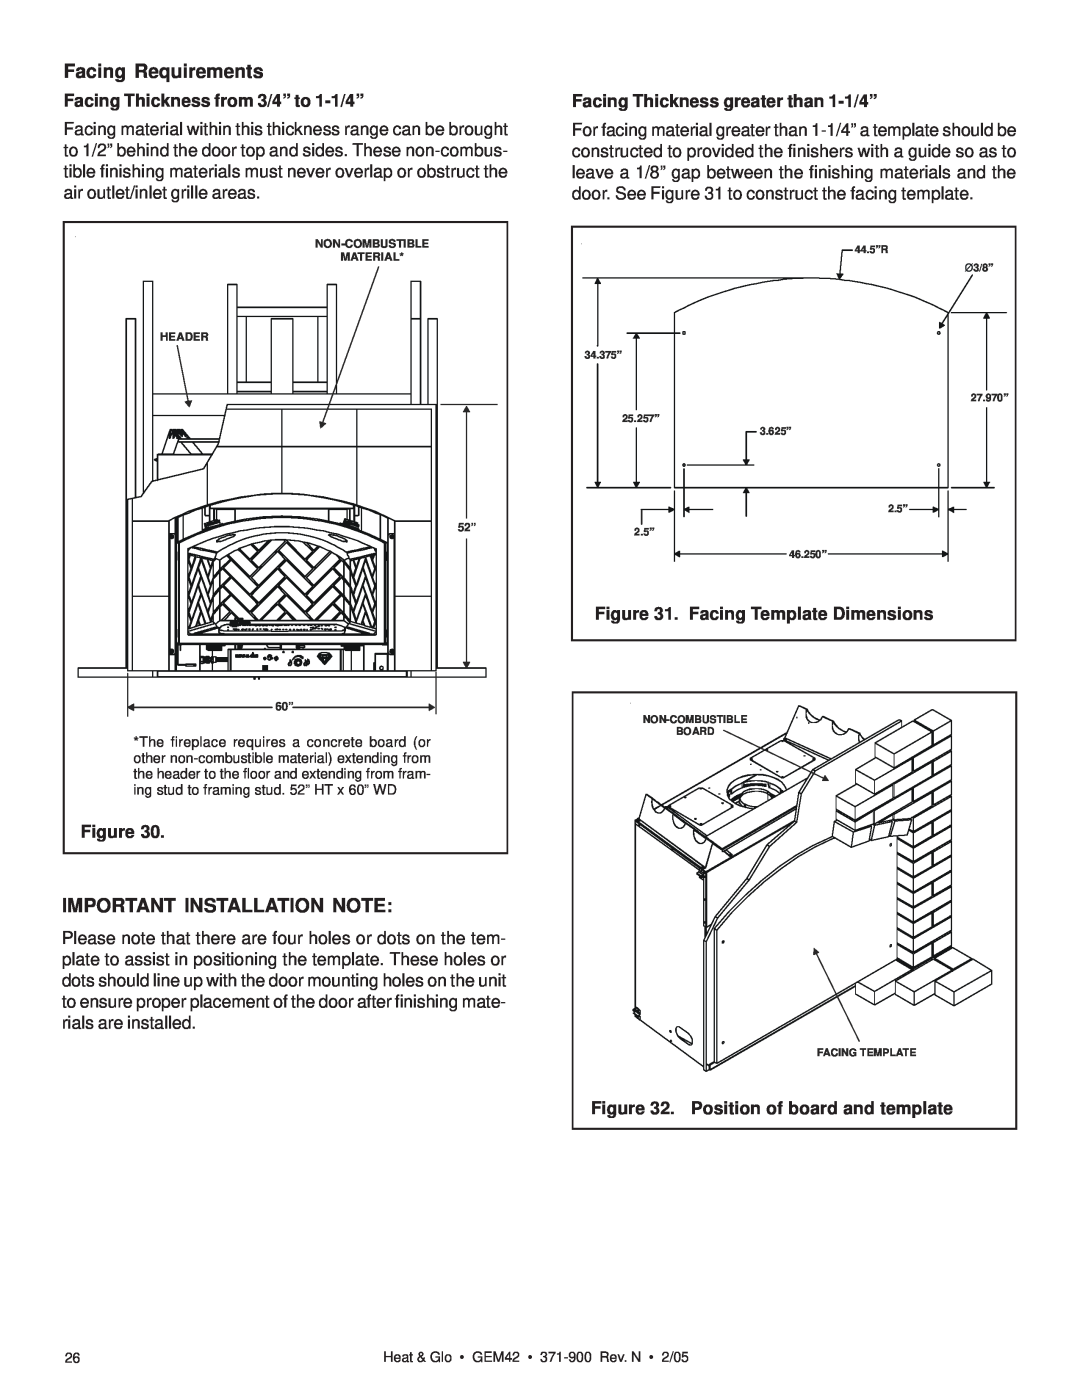 Heat & Glo LifeStyle GEM42 manual Facing Requirements, Important Installation Note, Facing Thickness from 3/4” to 1-1/4” 